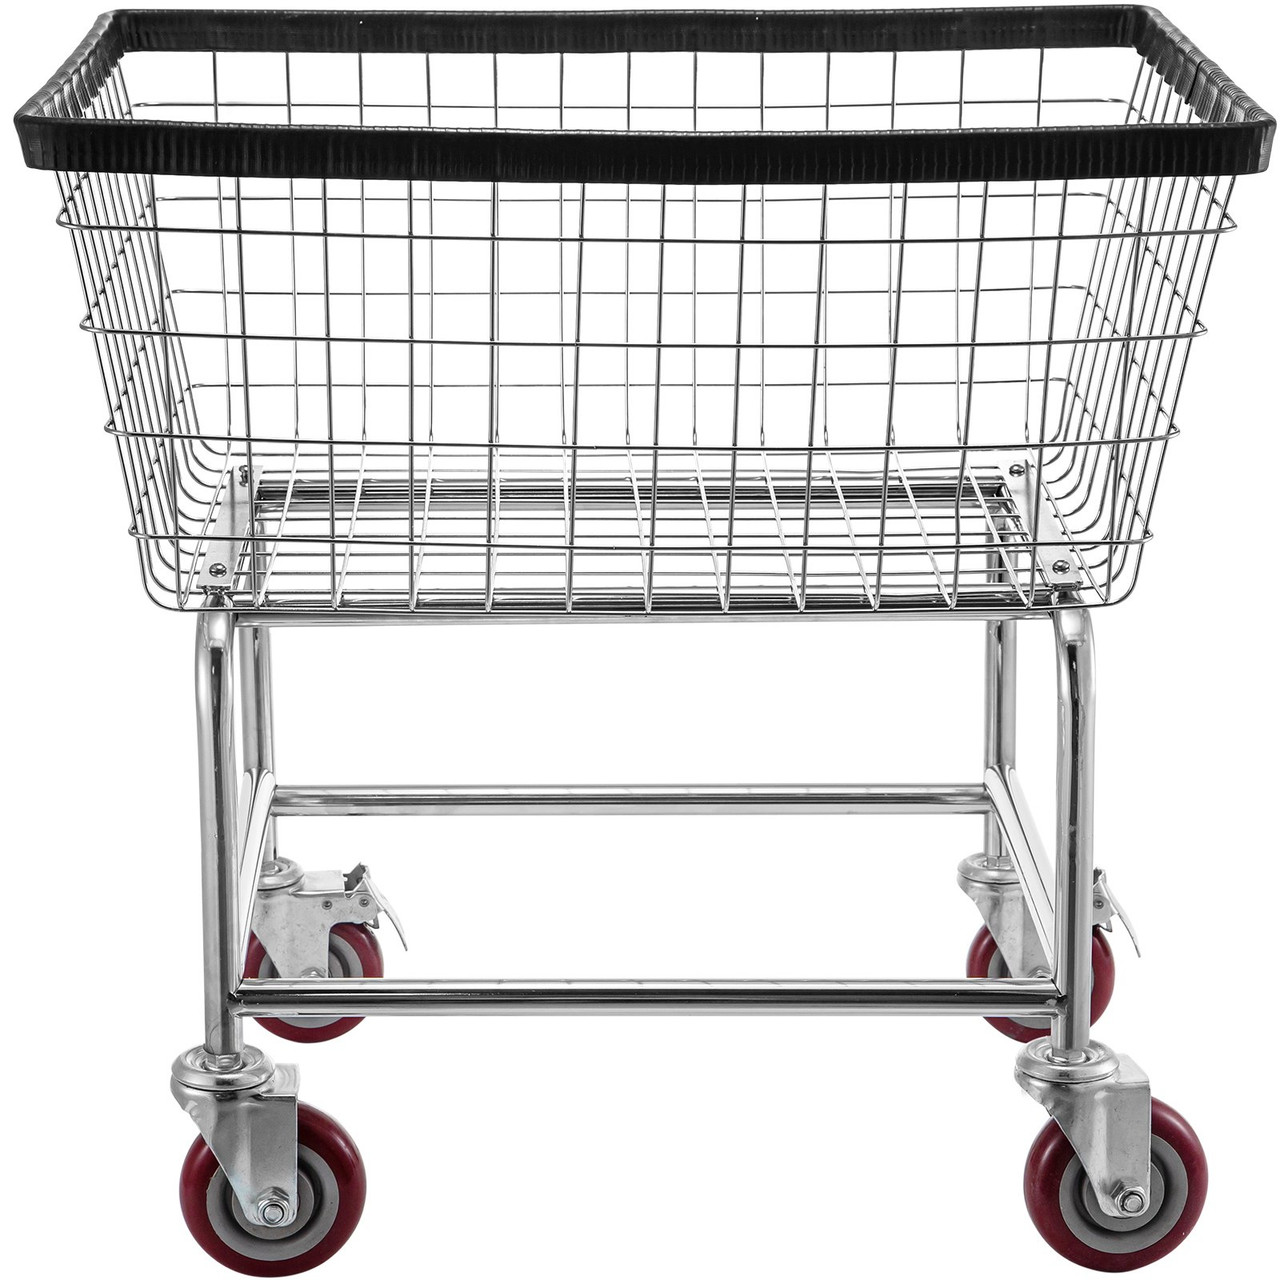 Wire Laundry Cart 2.2 Bushel, Wire Laundry Basket With Wheels 20''x15.7''x26'', Commercial Wire Laundry Basket Cart, Galvanized Steel Frame with 5'' Casters, Wire Basket Cart for Laundry